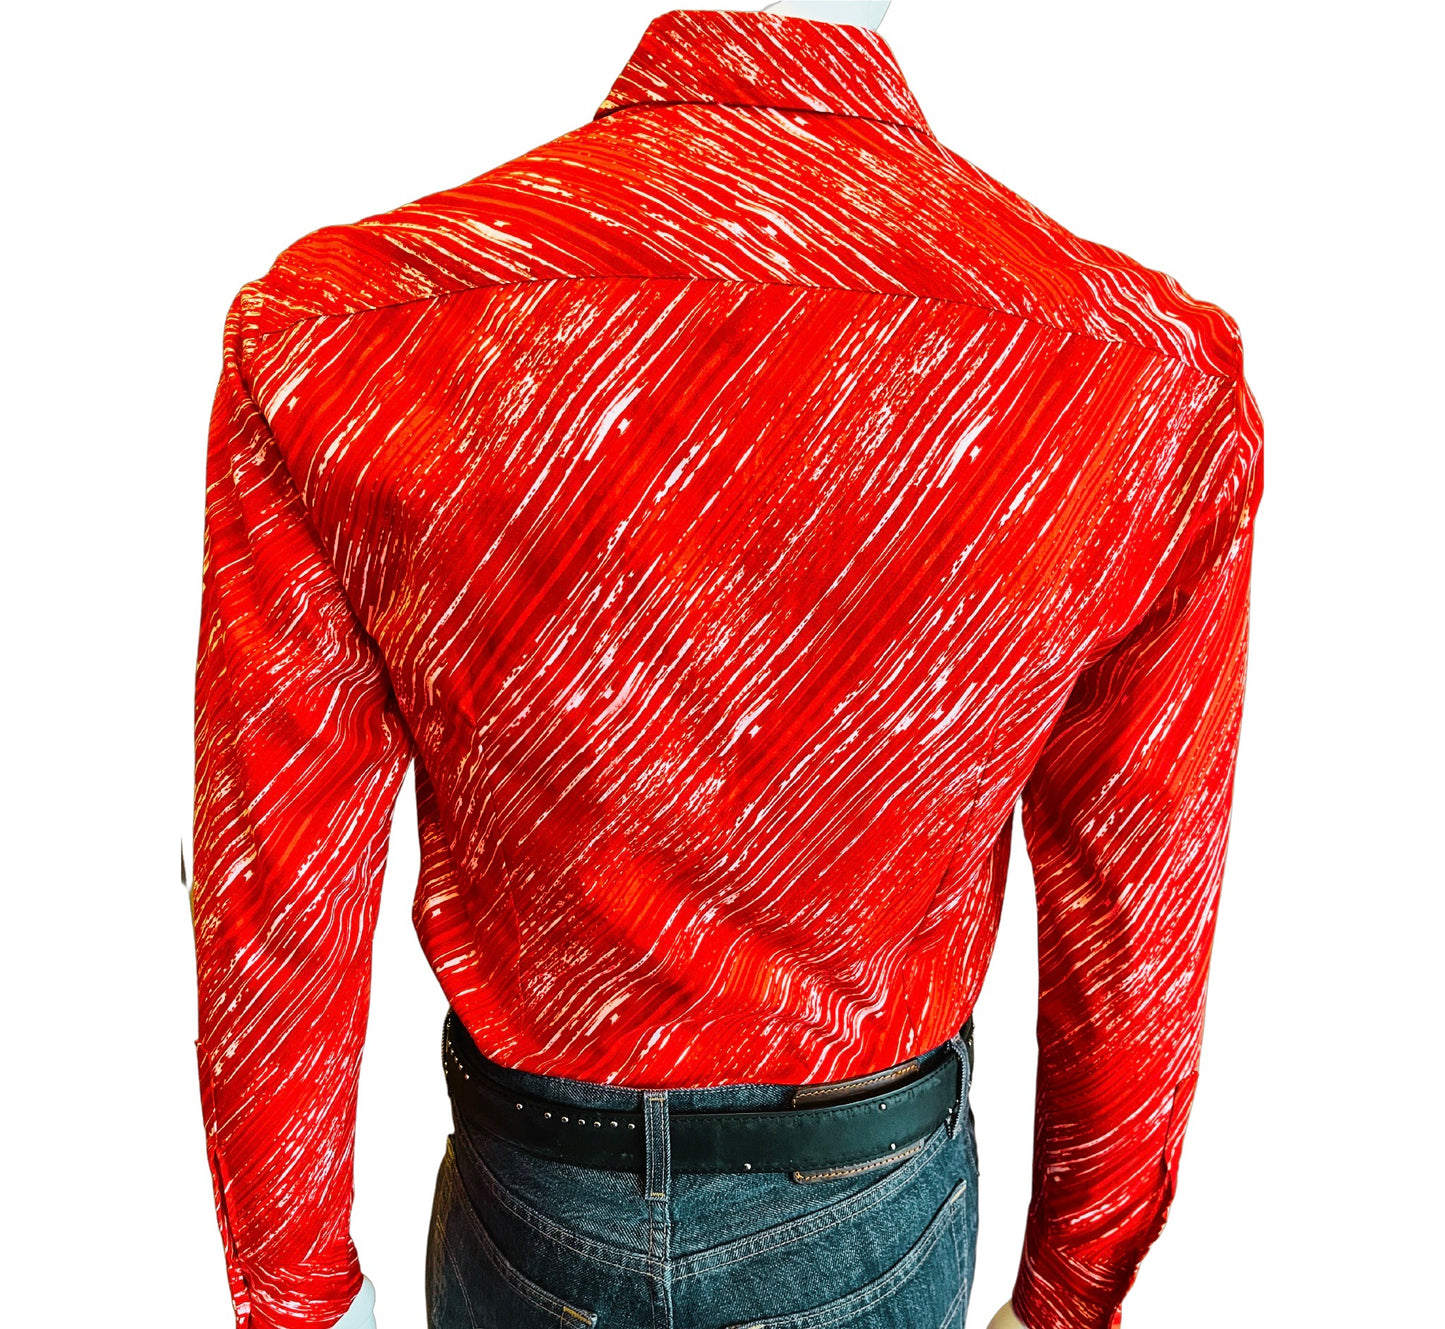 Long Sleeve Red Stripe Shirt - Stand Out From the Crowd